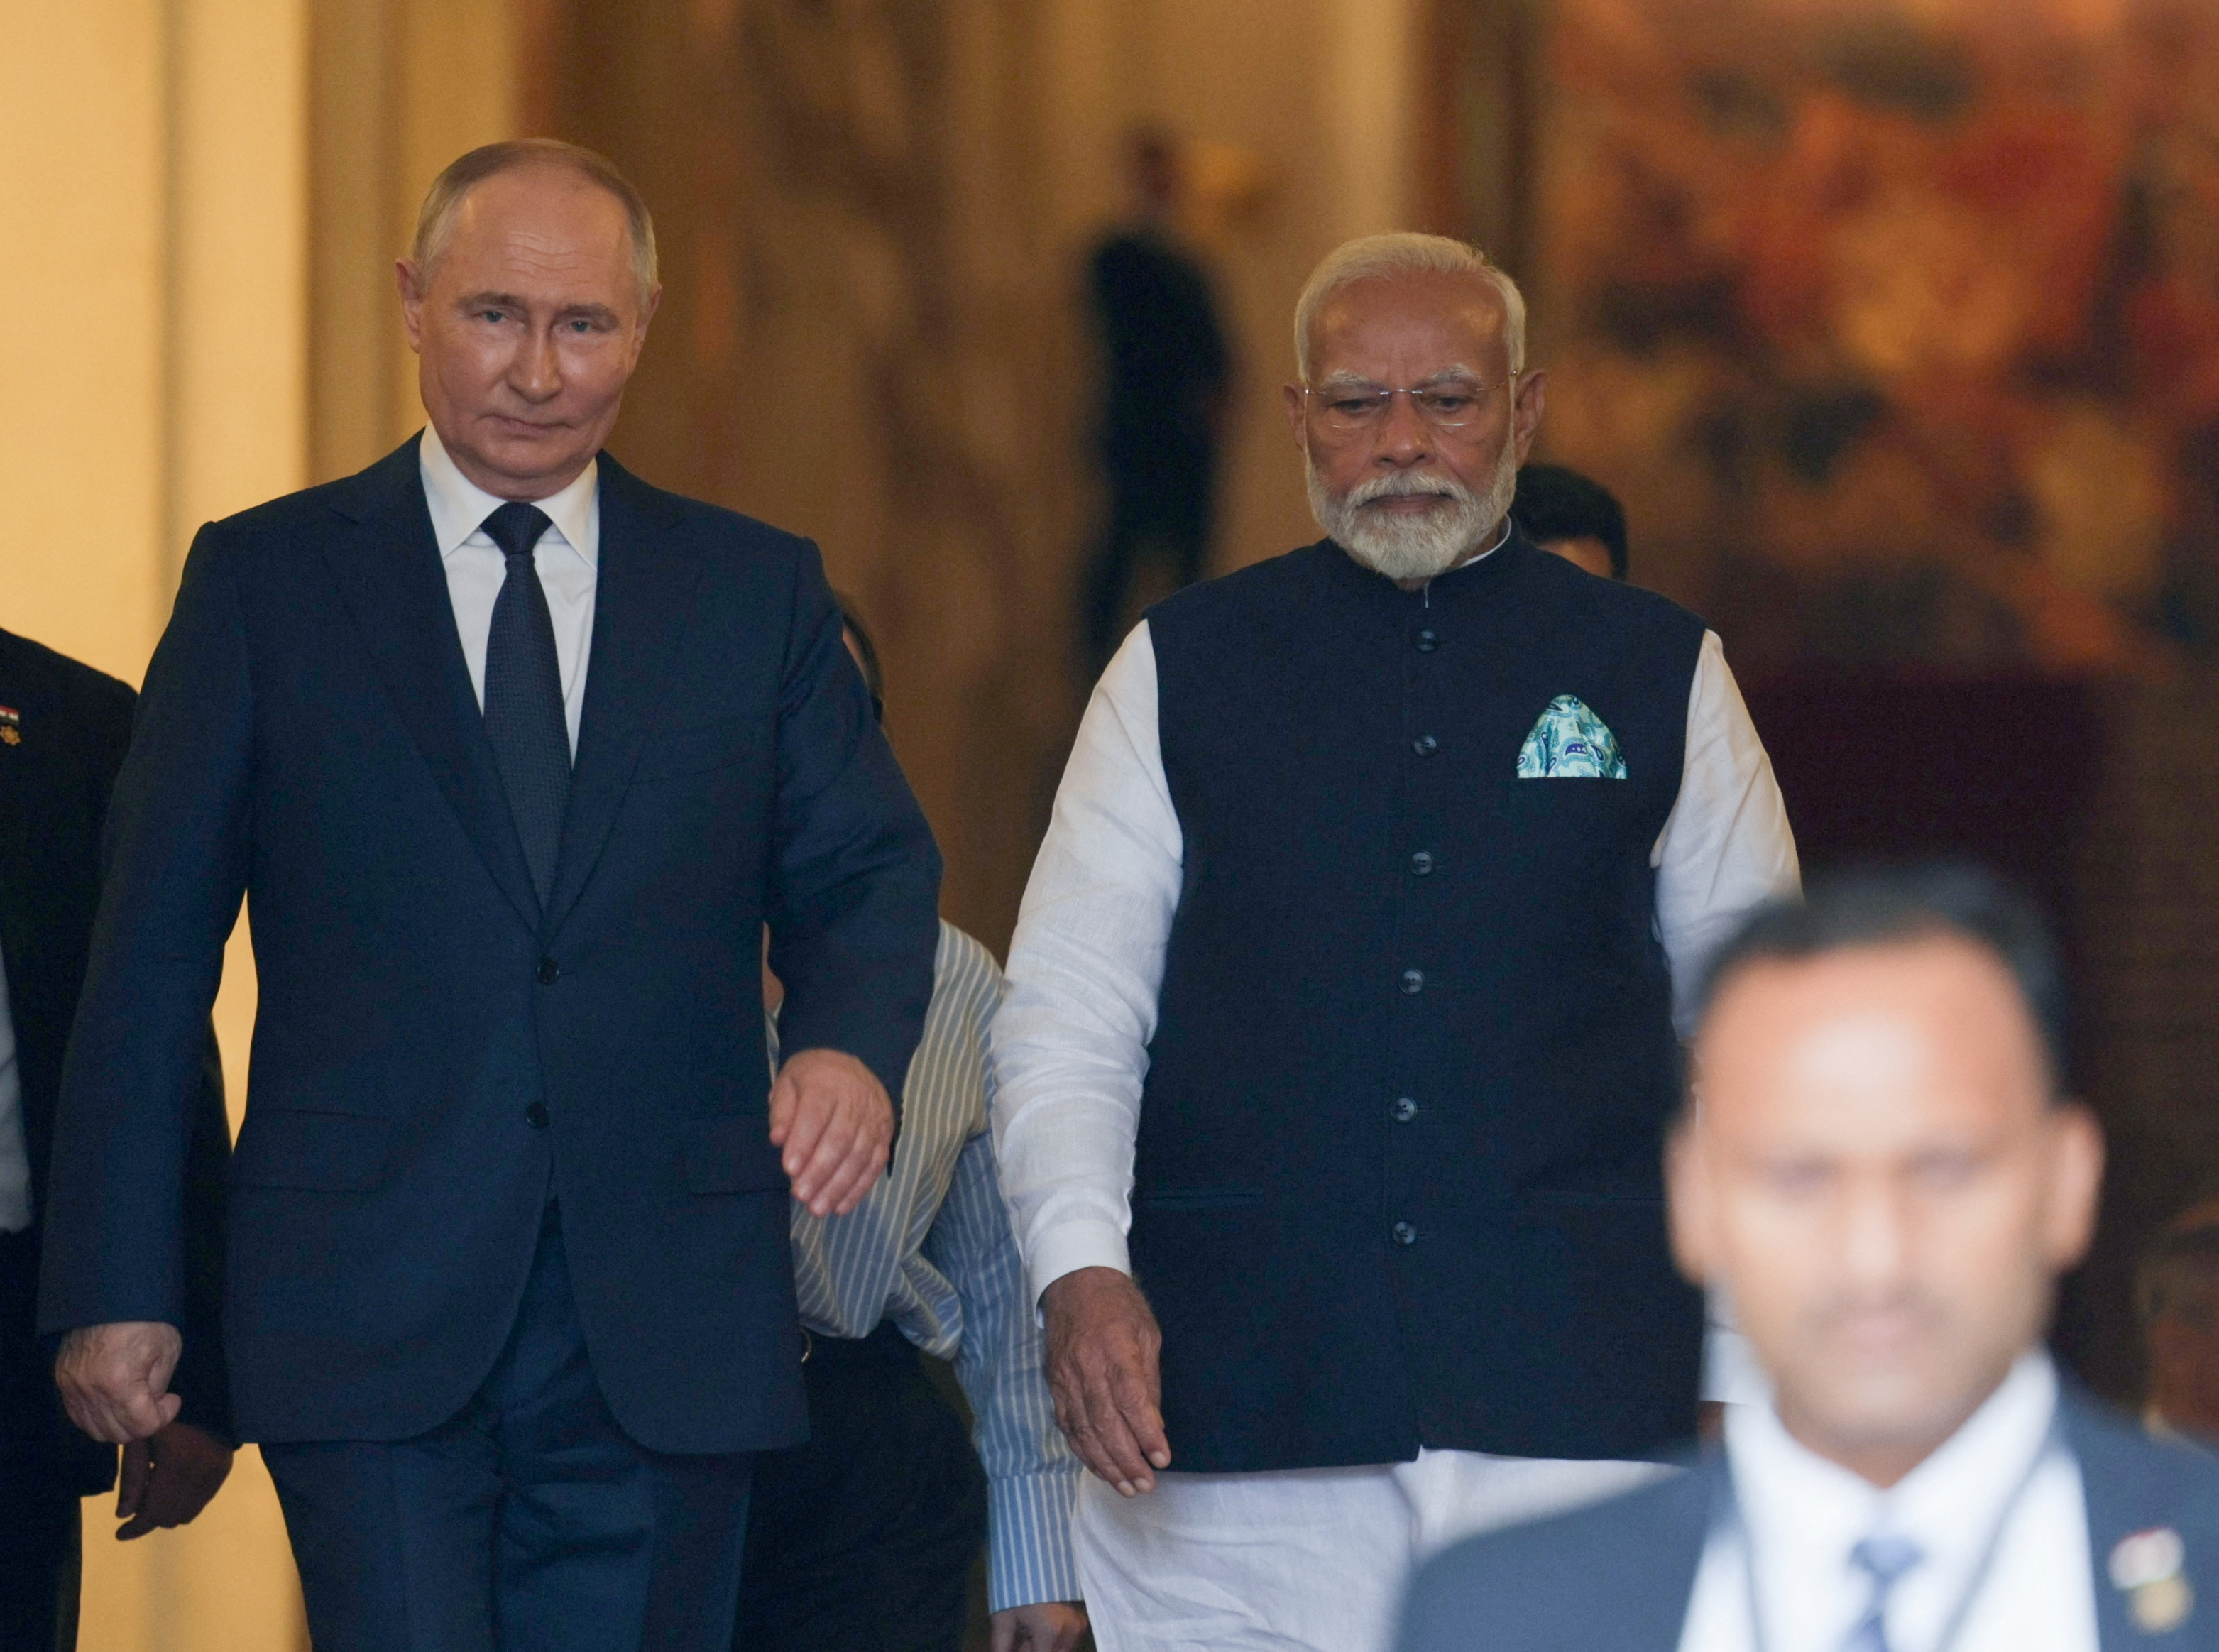 Russia's President Vladimir Putin meets with India's Prime Minister Narendra Modi in Moscow